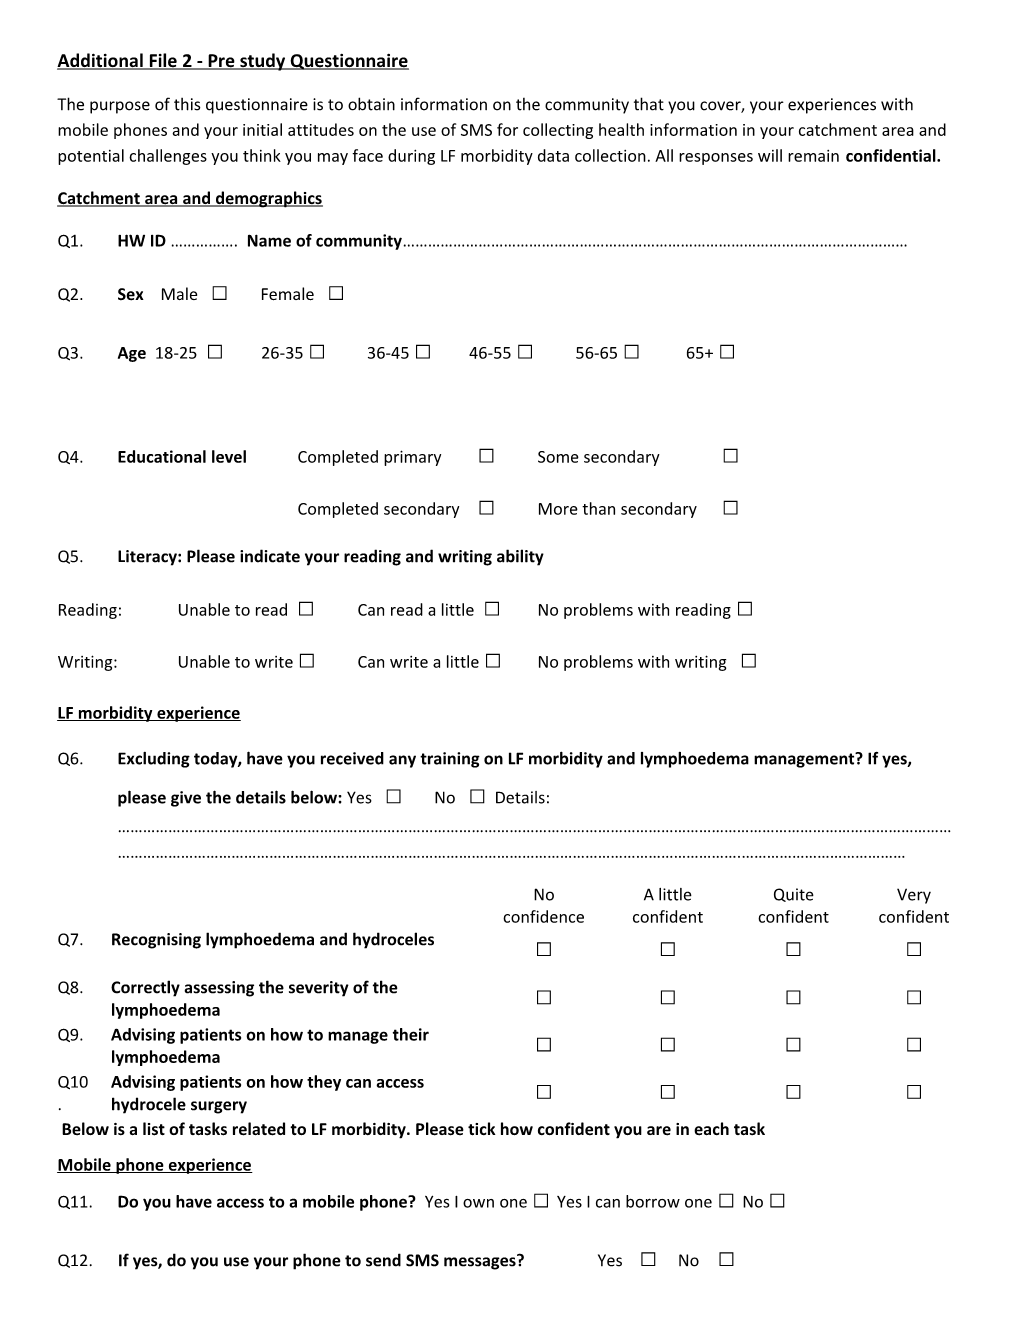 Additional File 2 - Pre Study Questionnaire